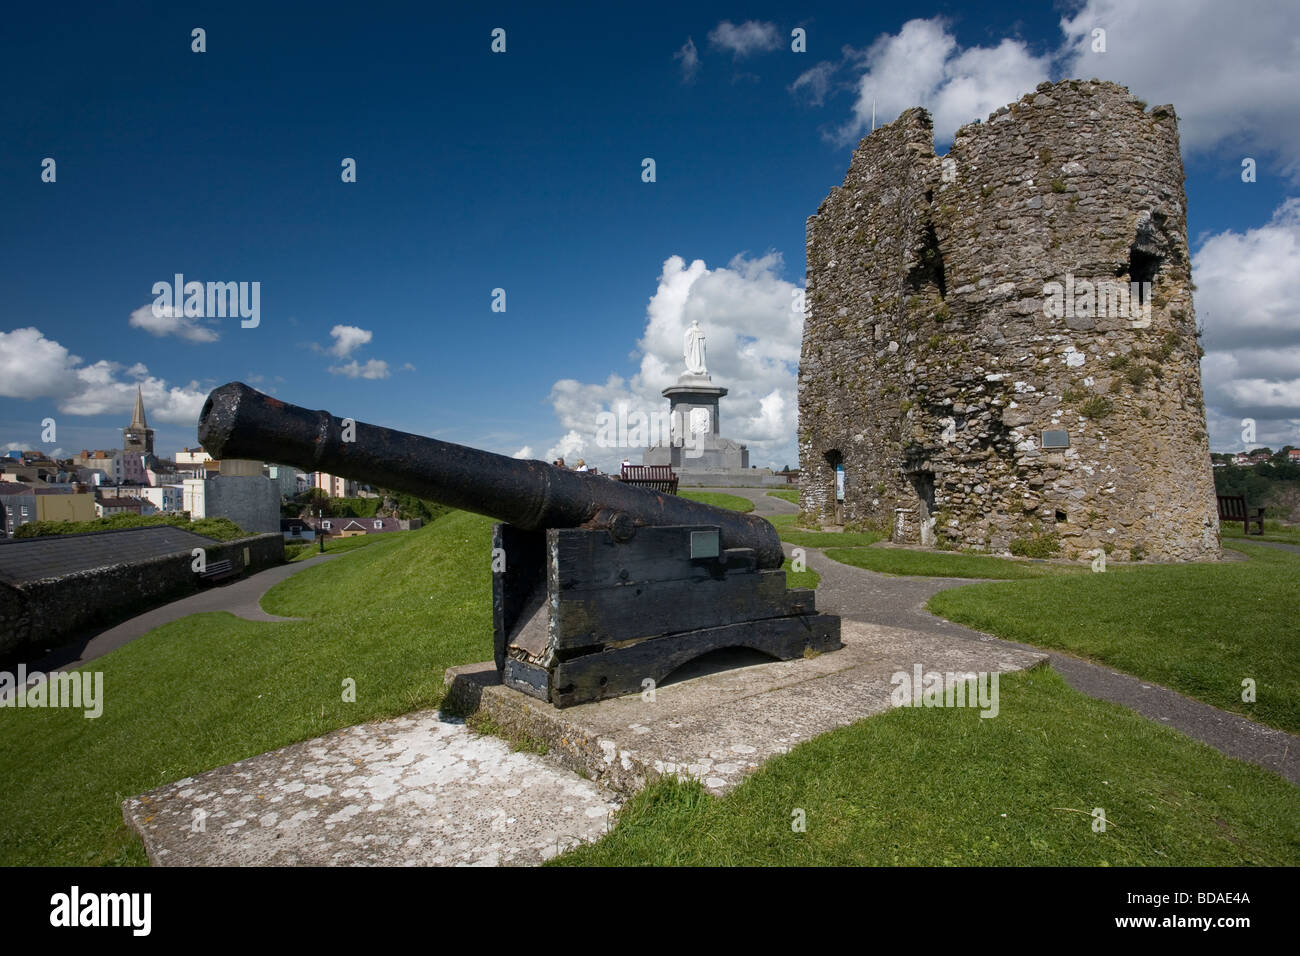 The crumbling ruins of Tenby Castle and one of several guns placed to defend the town from invaders, Castle Hill, Tenby Stock Photo